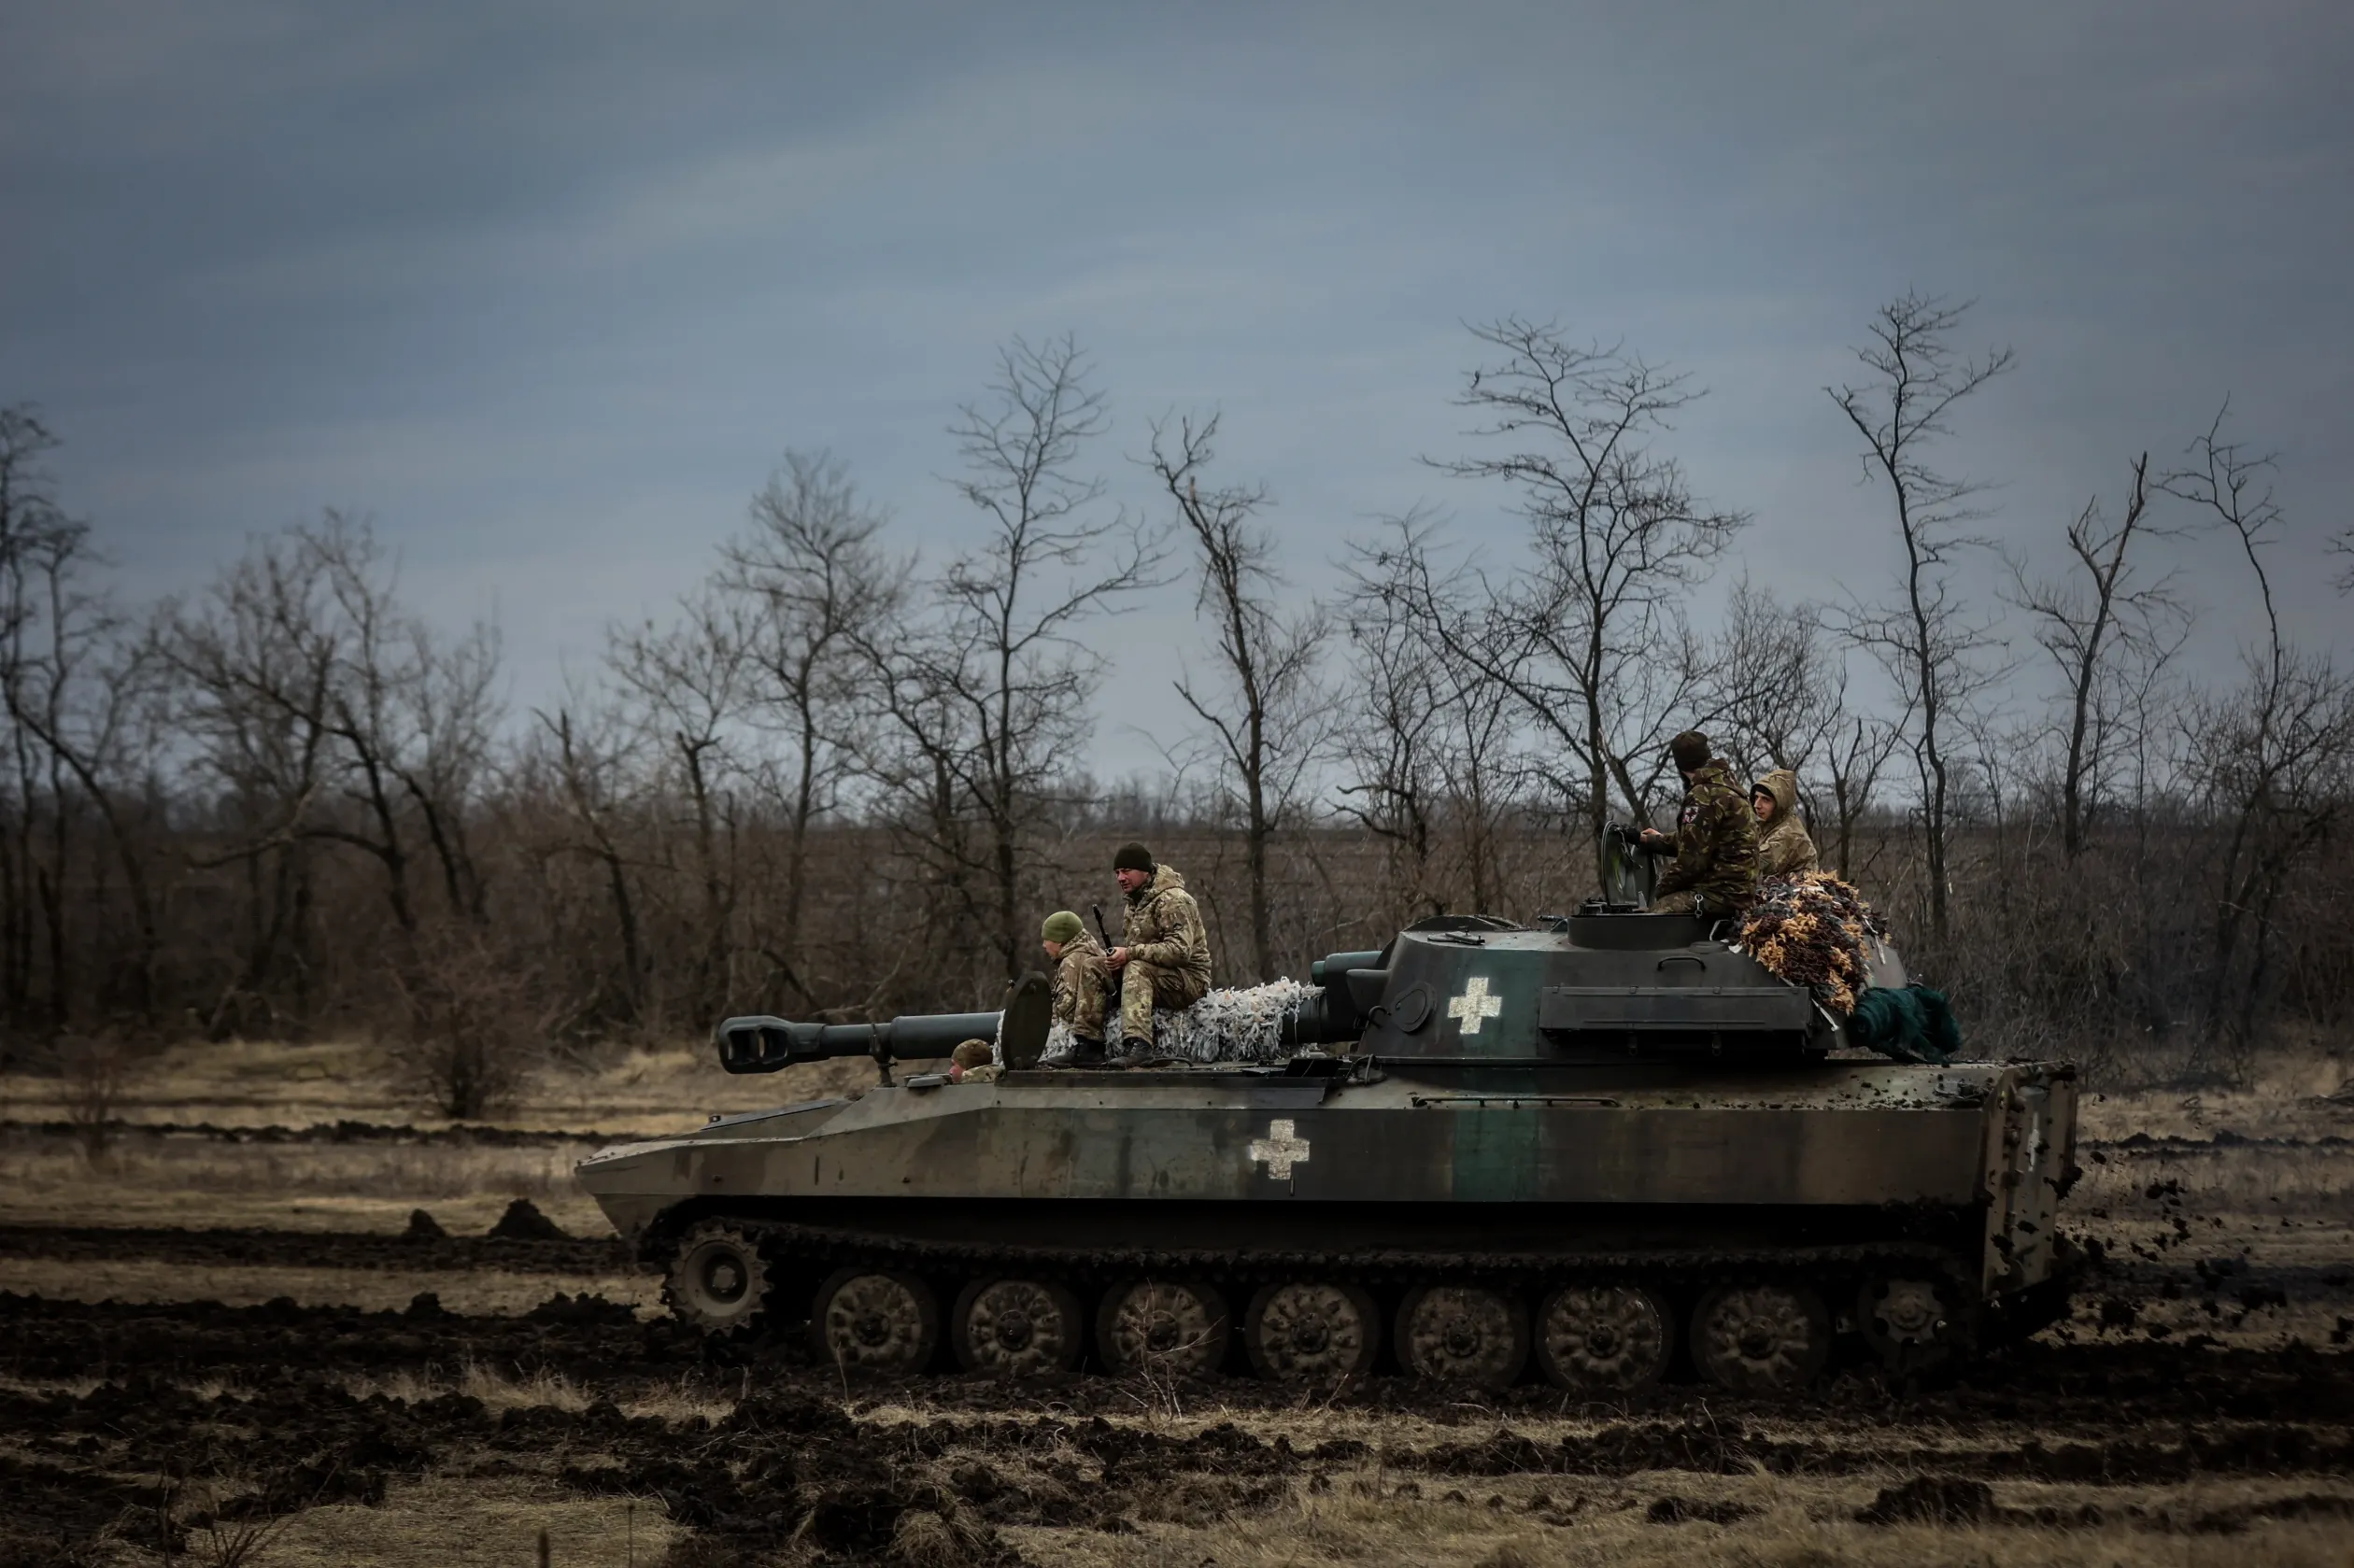 Members of the 128th Brigade on the road before the next day's deployment – Photo: István Huszti / Telex